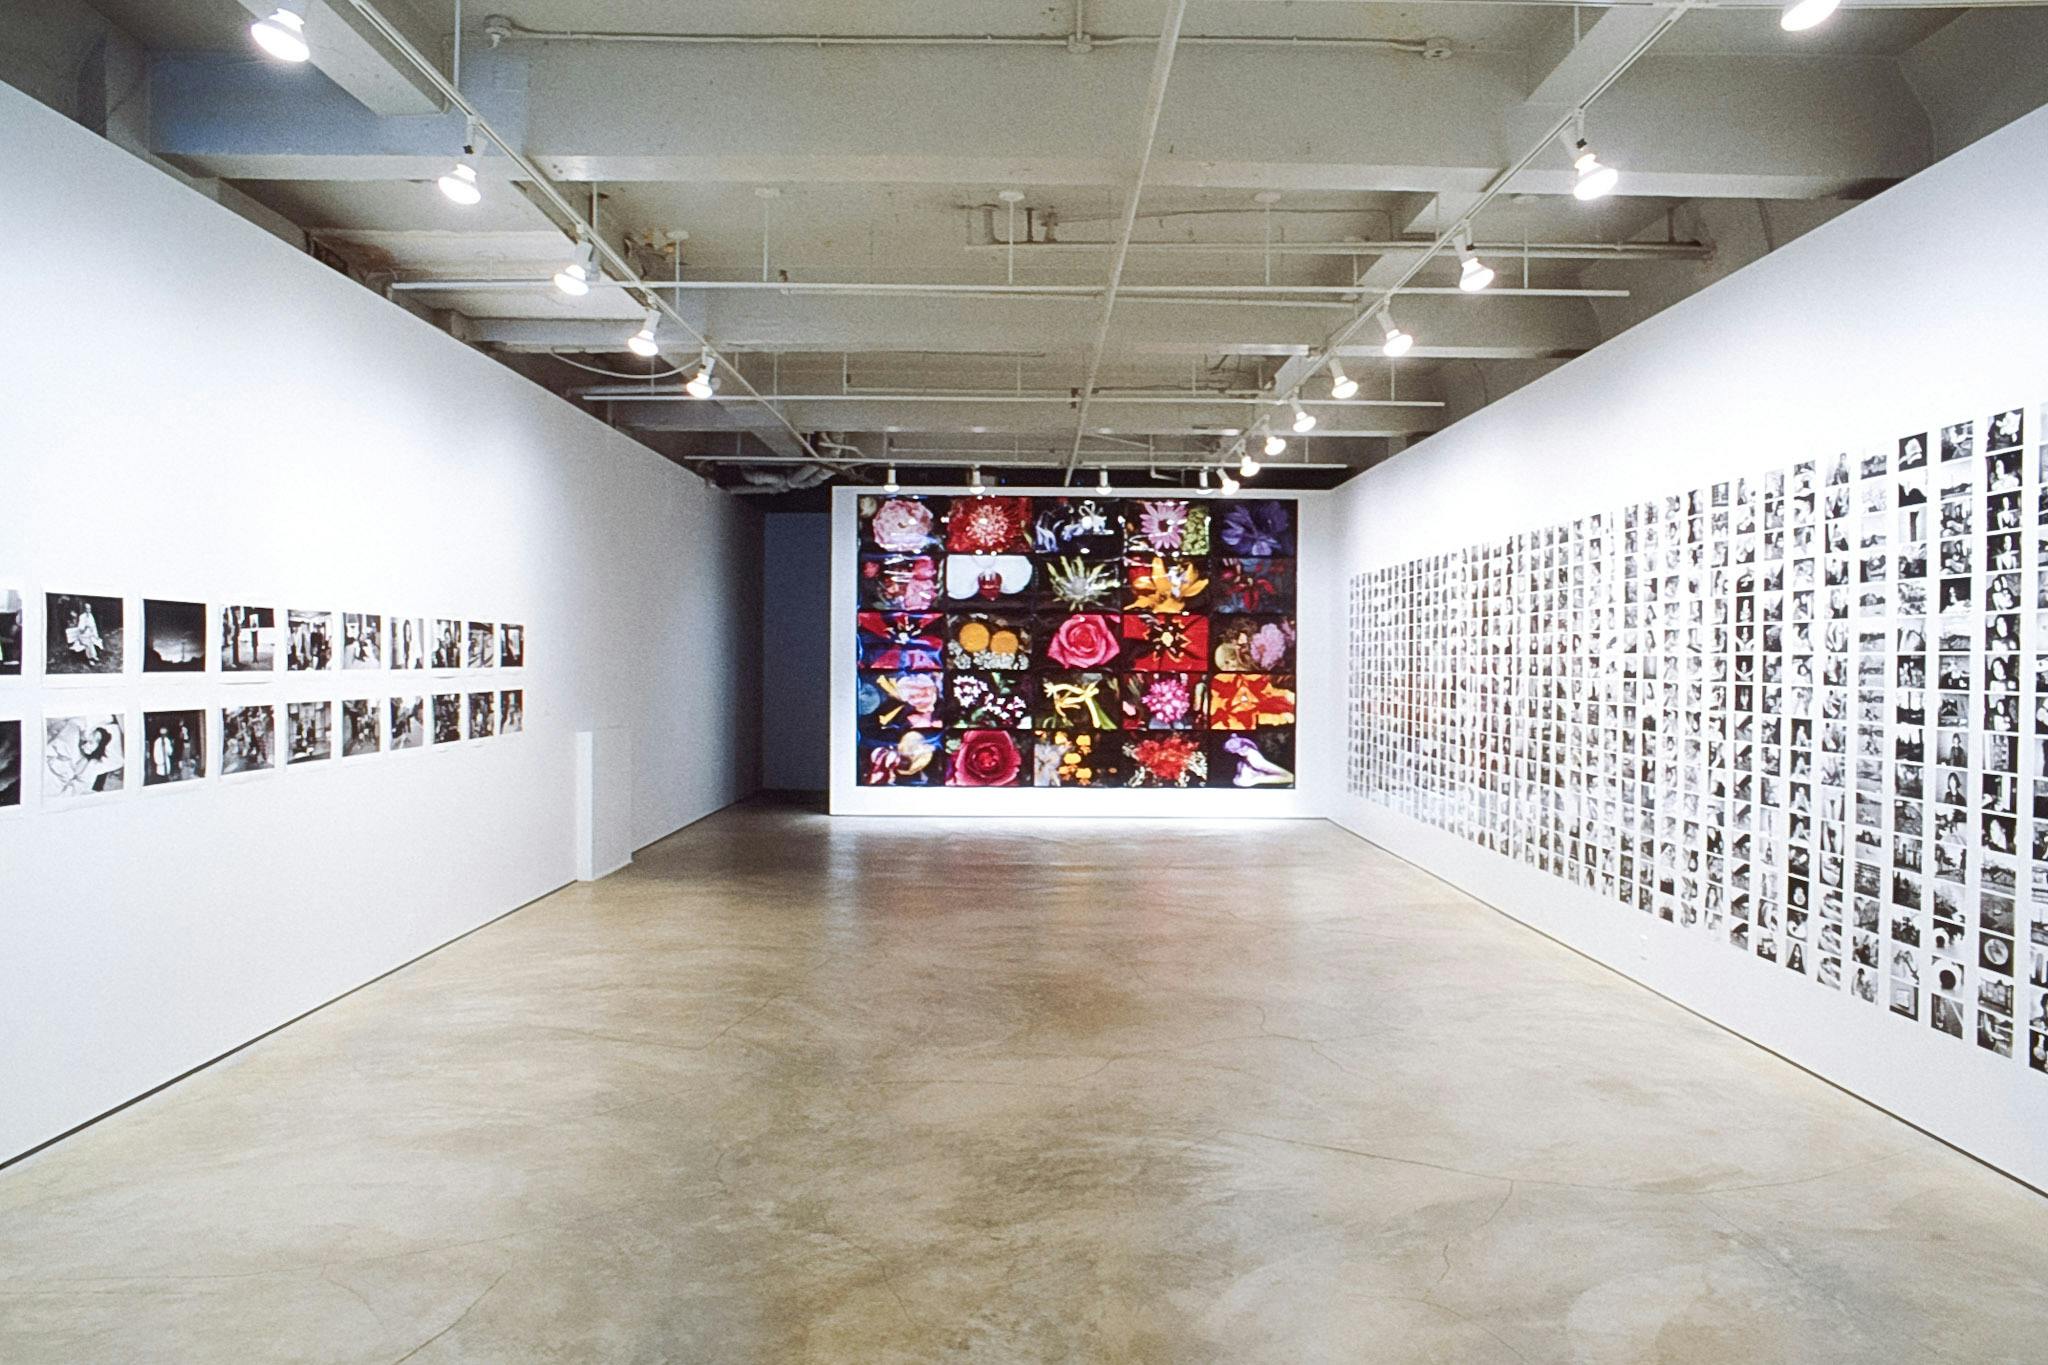 Many photographs are installed on the gallery walls. There are some small black and white photographs attached to the side walls. A large-scale coloured photo collage is mounted on the middle wall.